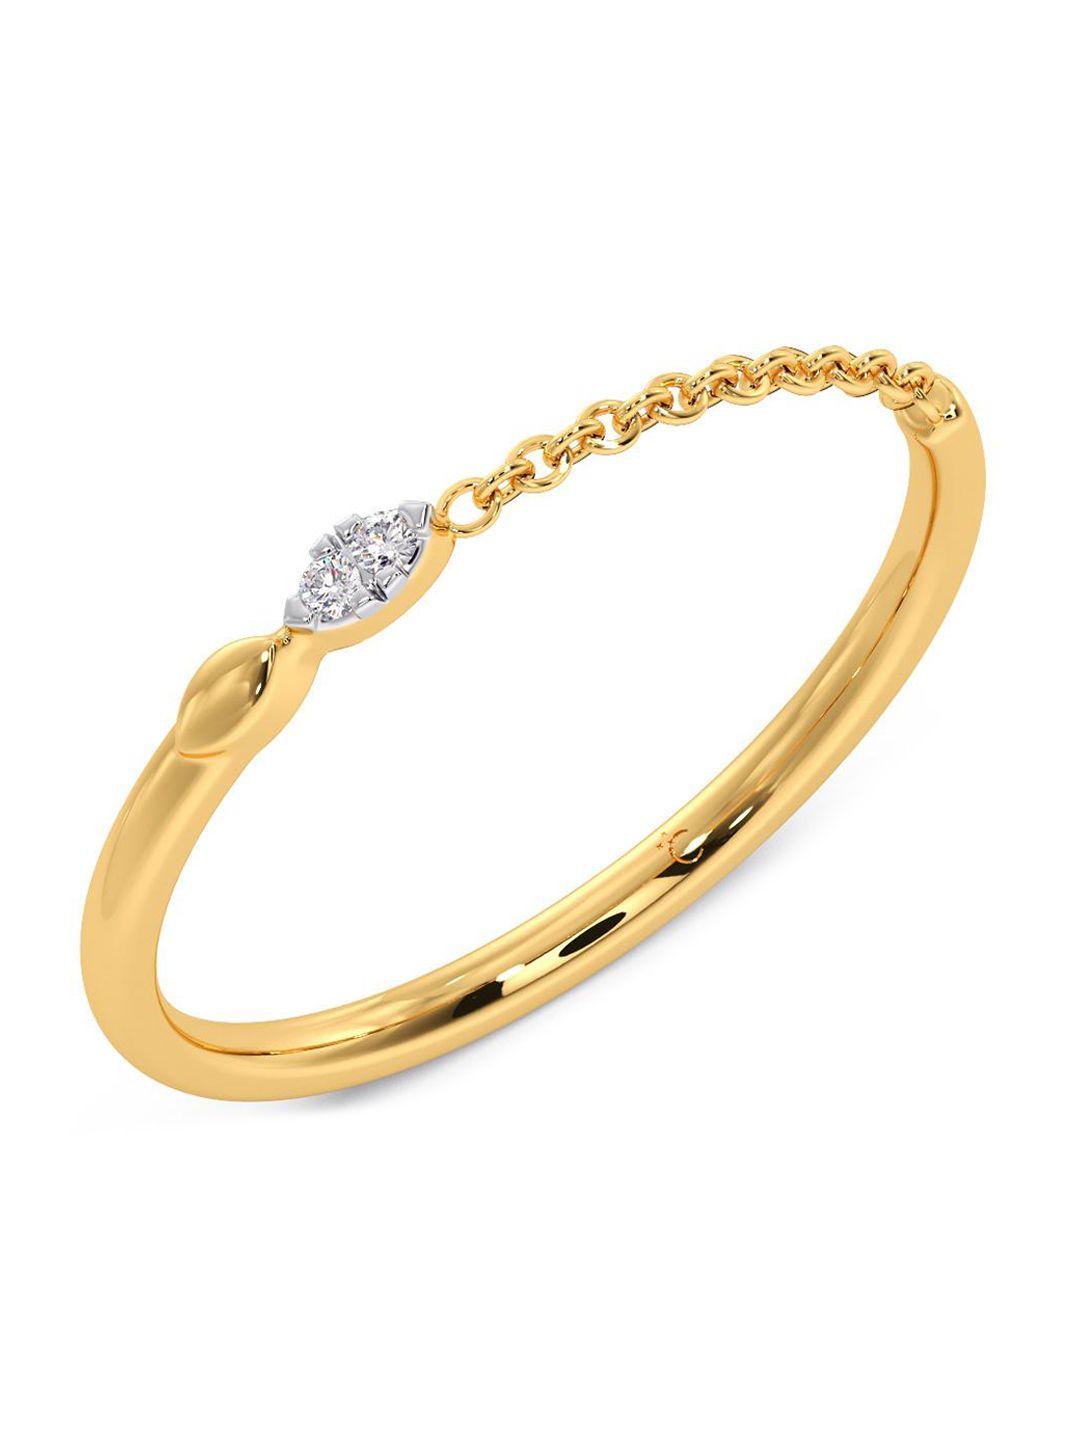 candere a kalyan jewellers company diamond-studded 18kt gold ring - 1.02 gm